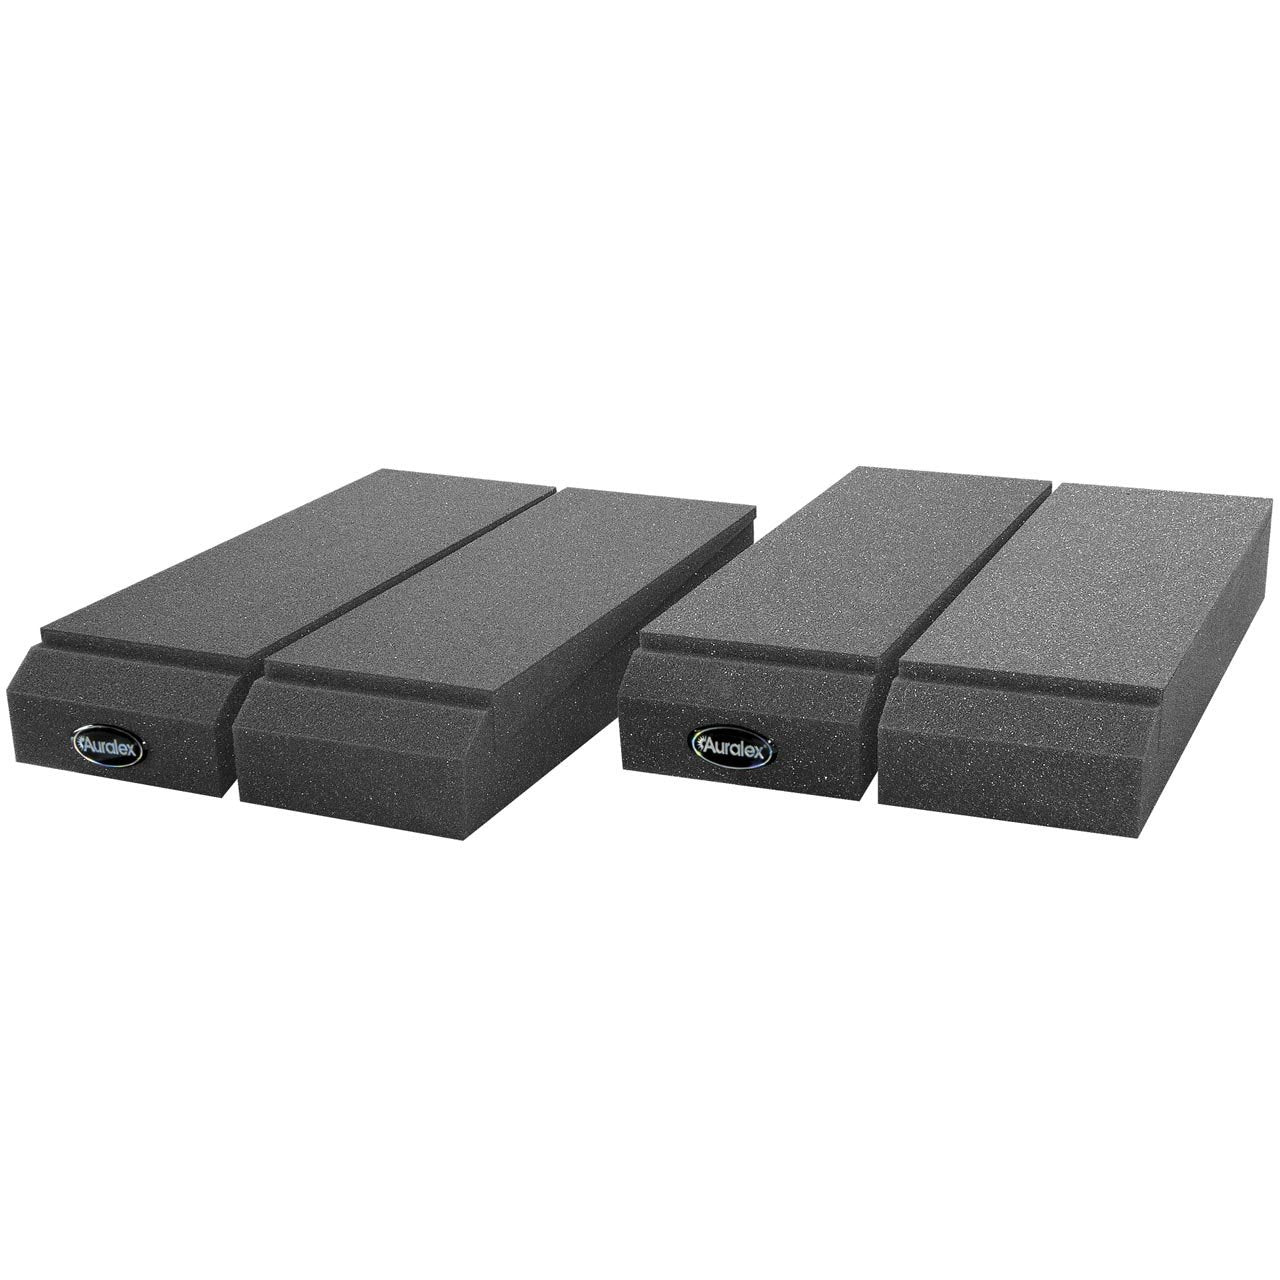 Monitor Isolation Pads